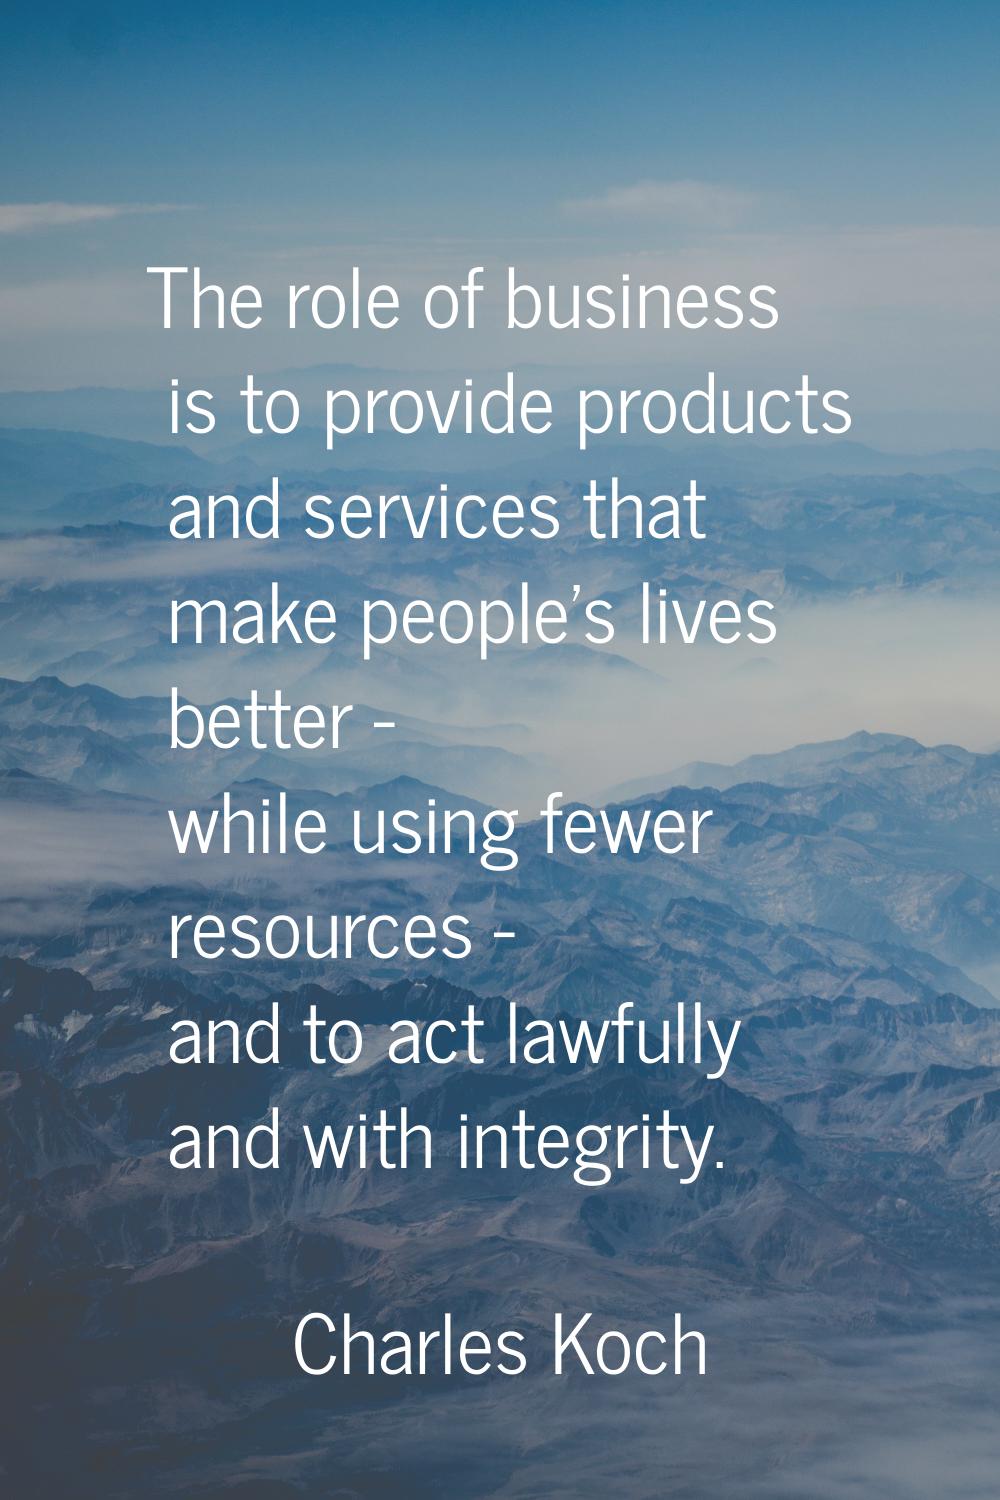 The role of business is to provide products and services that make people's lives better - while us